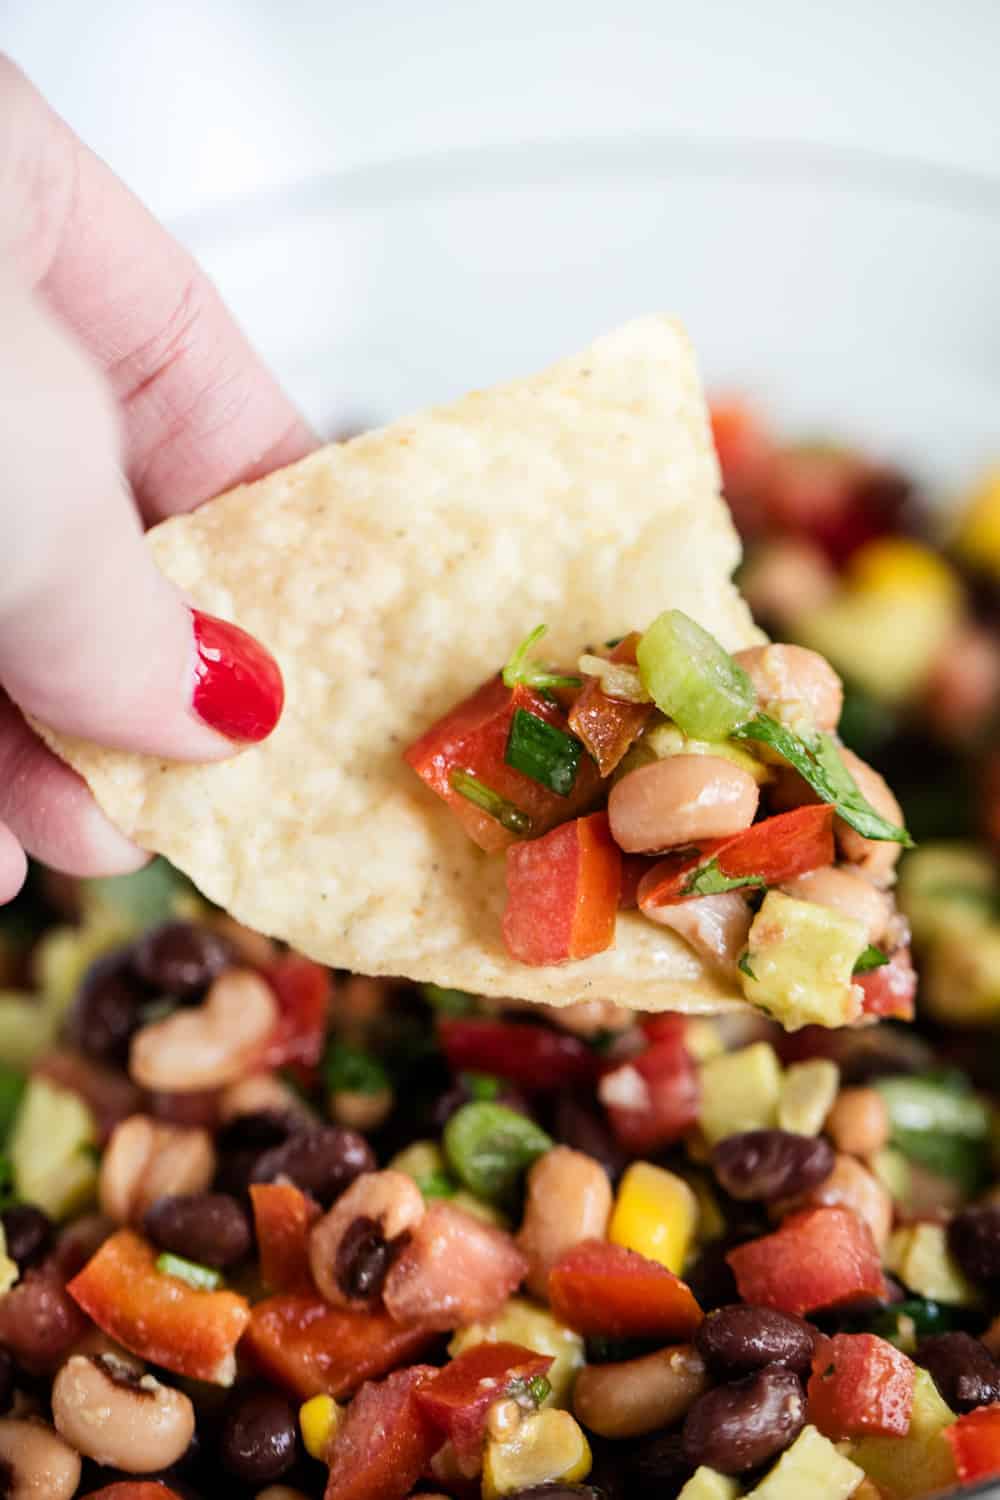 Tortilla chip being dipped in Texas caviar.